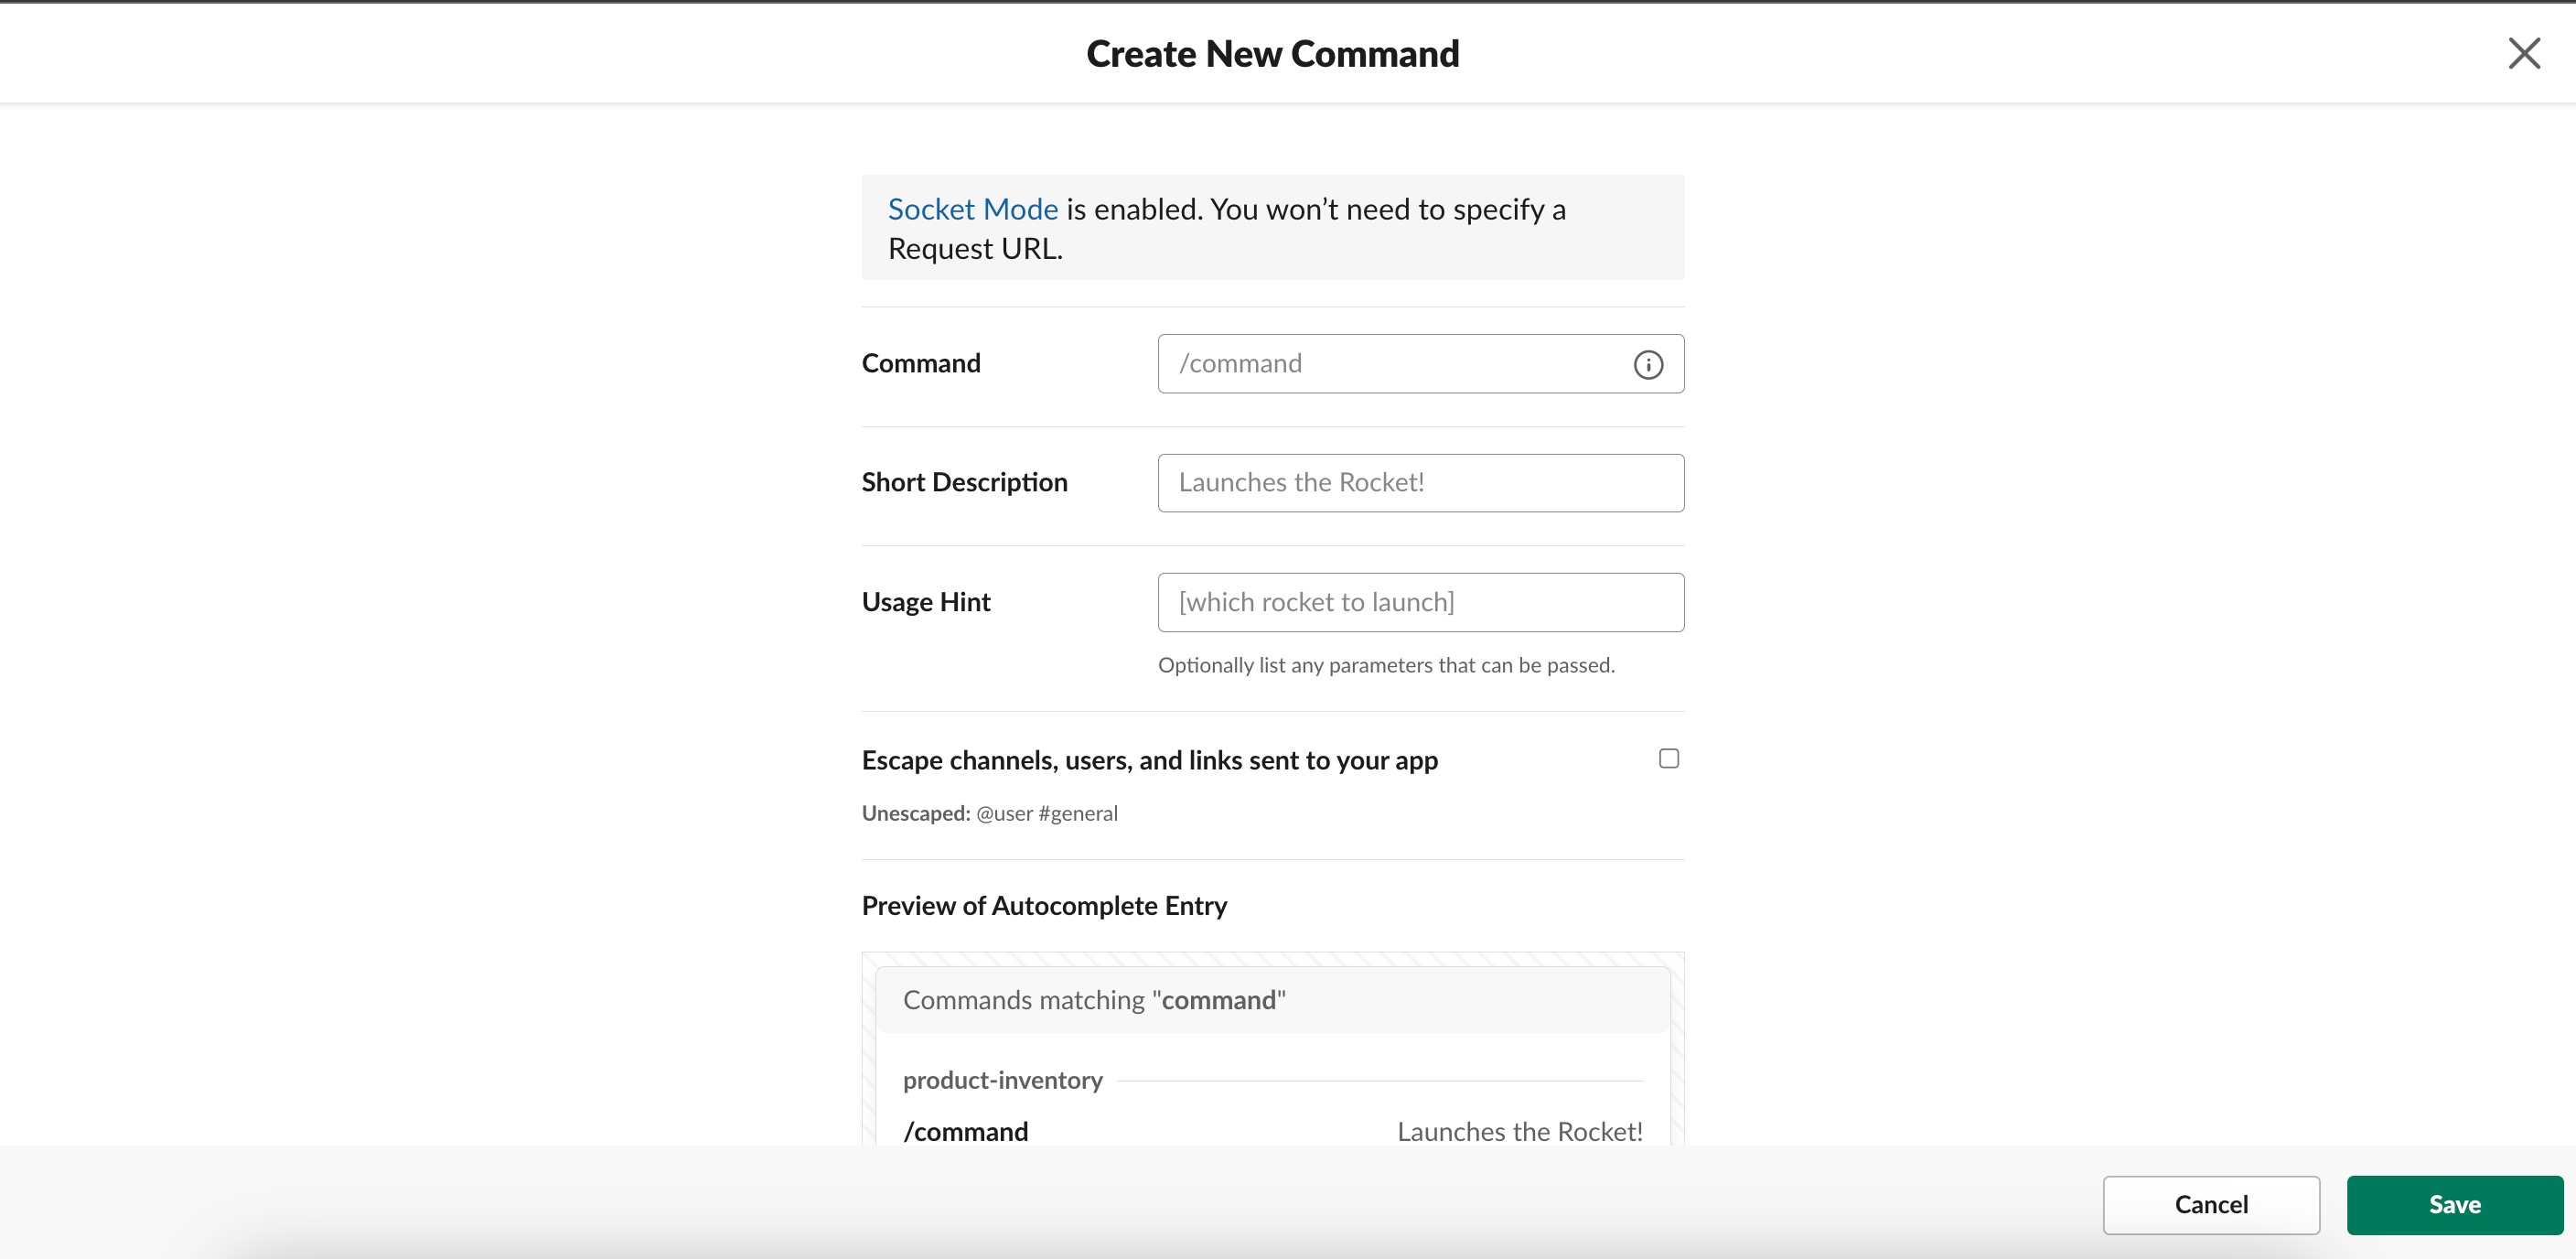 Slack Create New Command page with options for command, short description, and usage hint. Also has details for escape channels, users, and links sent to your app and a preview of an autocomplete entry